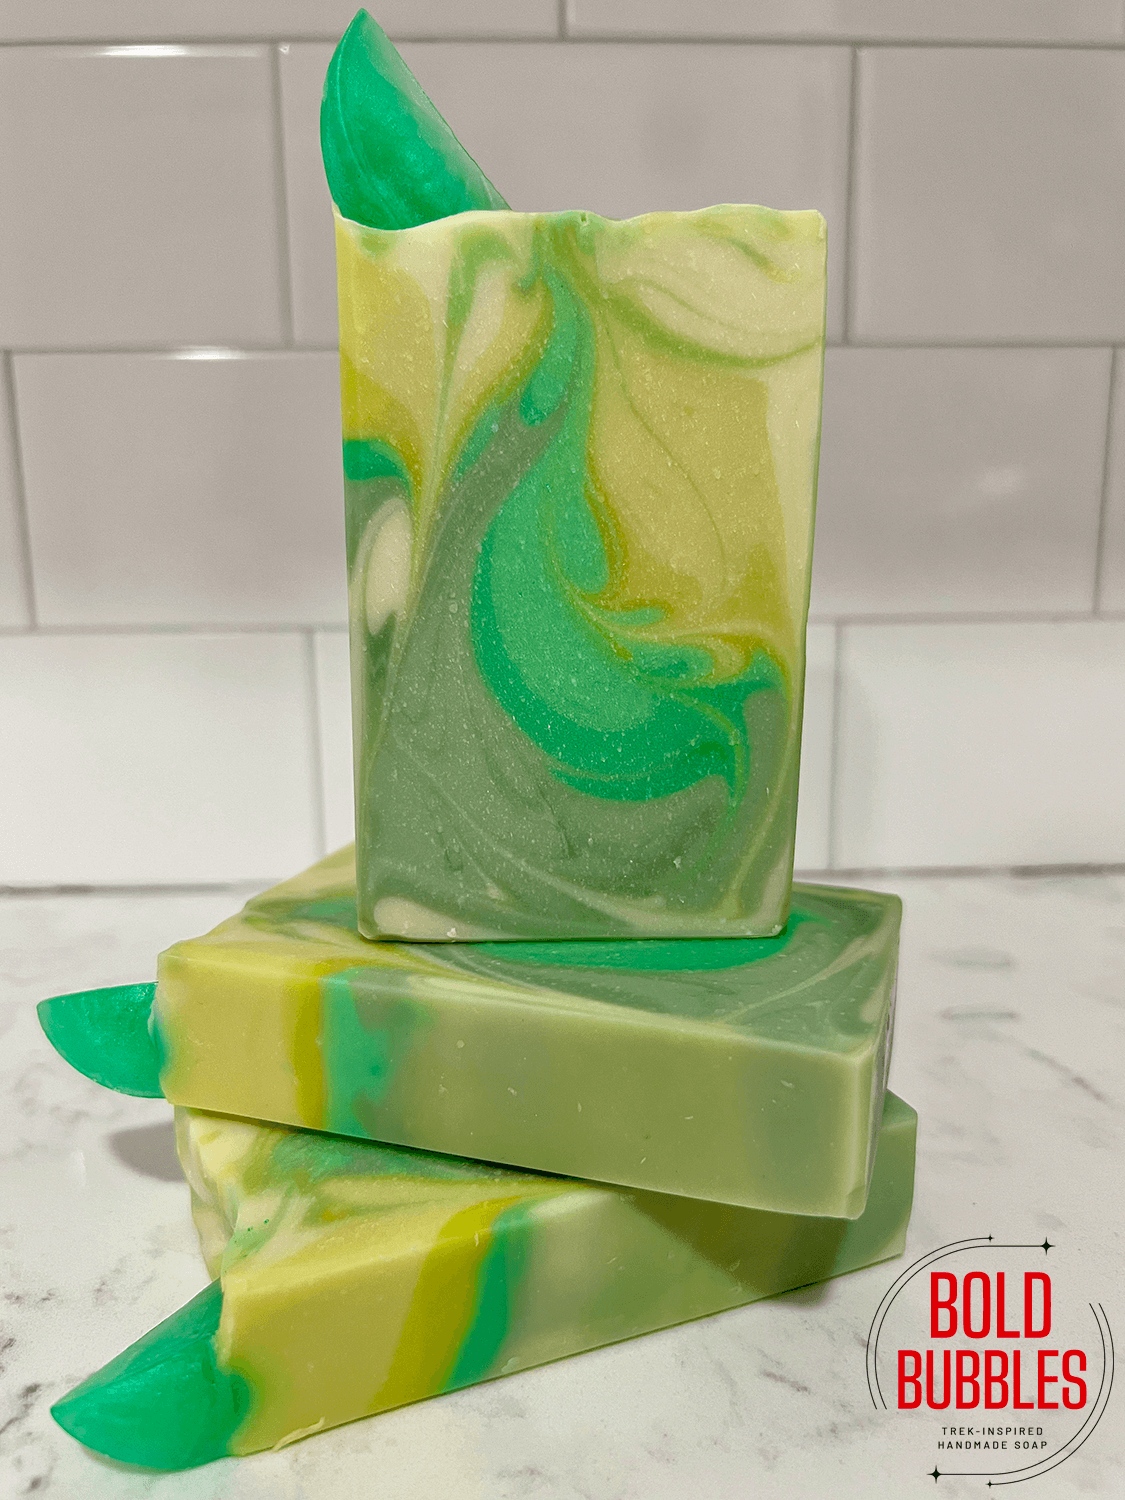 Swirled soap in various shades of green with a lime "garnish." This soap was inspired by the "Seven of Limes" drink mentioned by Jett Reno in Star Trek: Discovery.